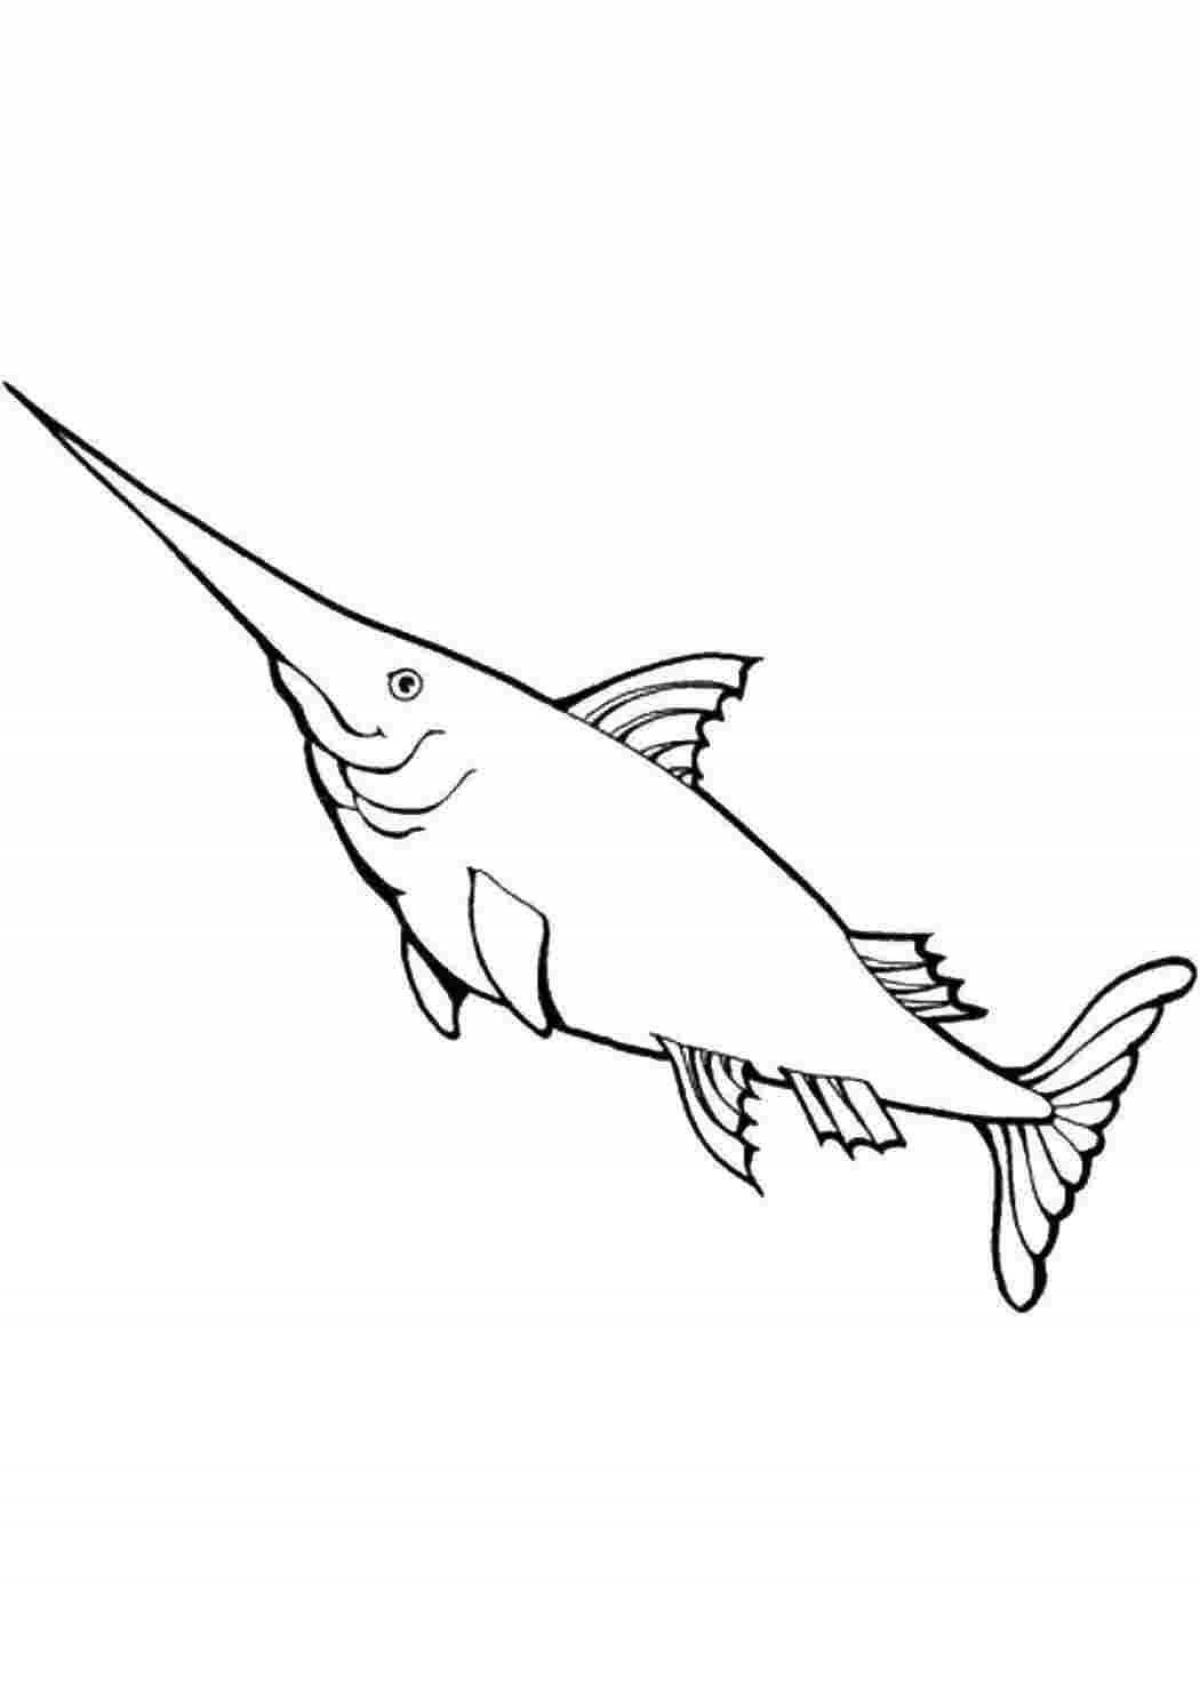 Awesome swordfish coloring page